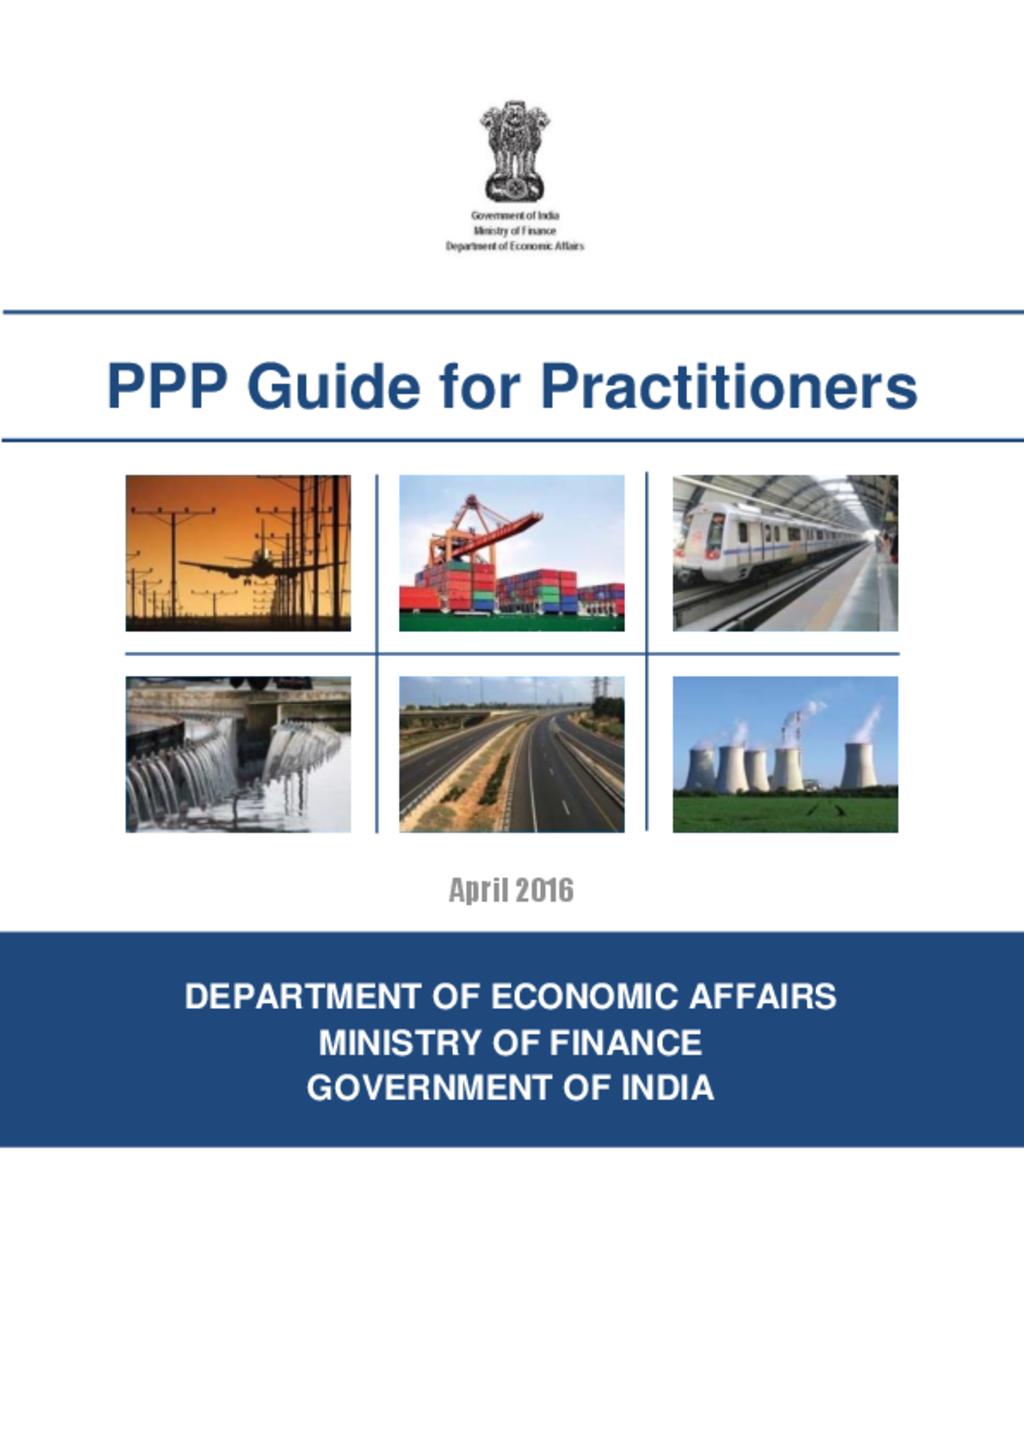  PPP Guide for Practitioners